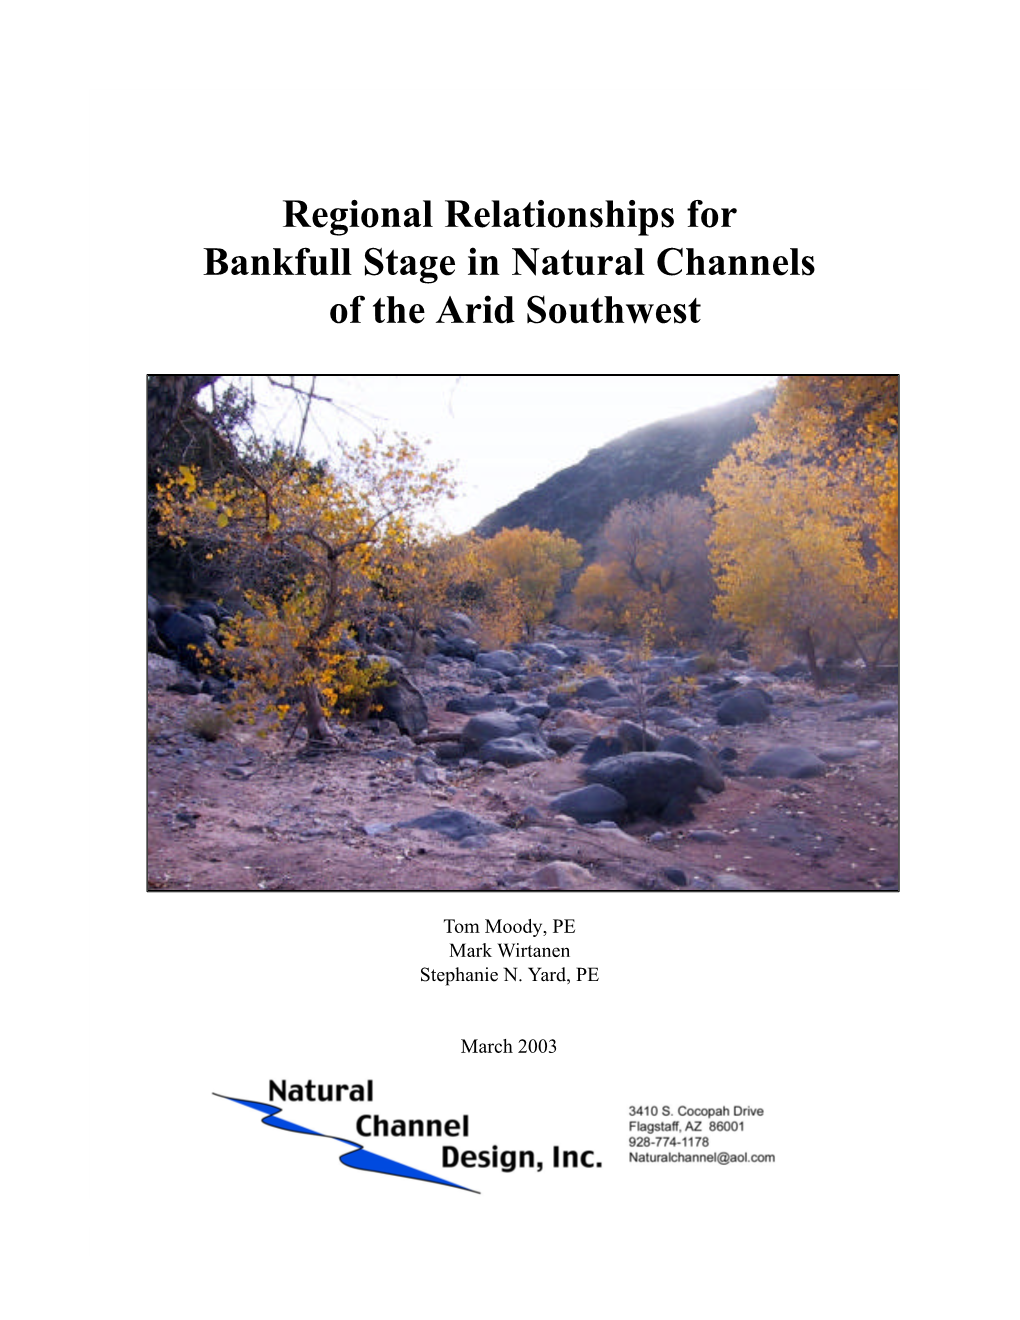 Regional Relationships for Bankfull Stage in Natural Channels of the Arid Southwest